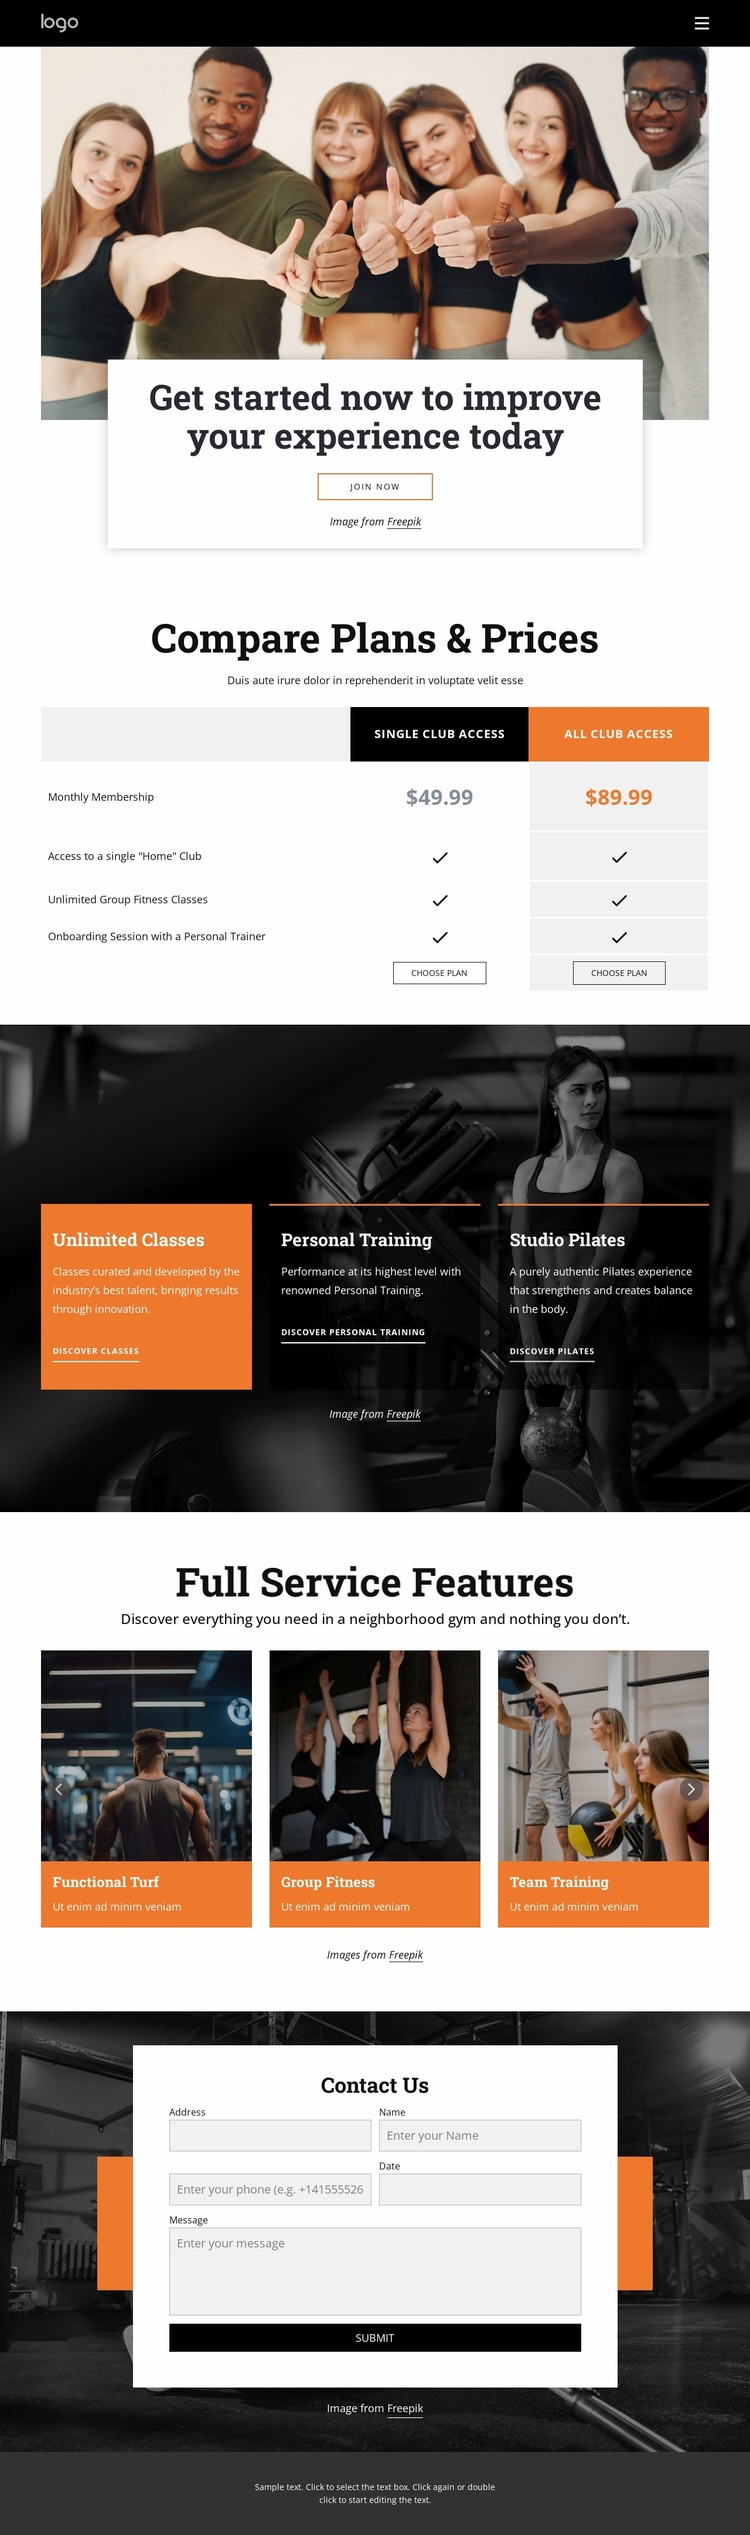 Exercise programs Website Template